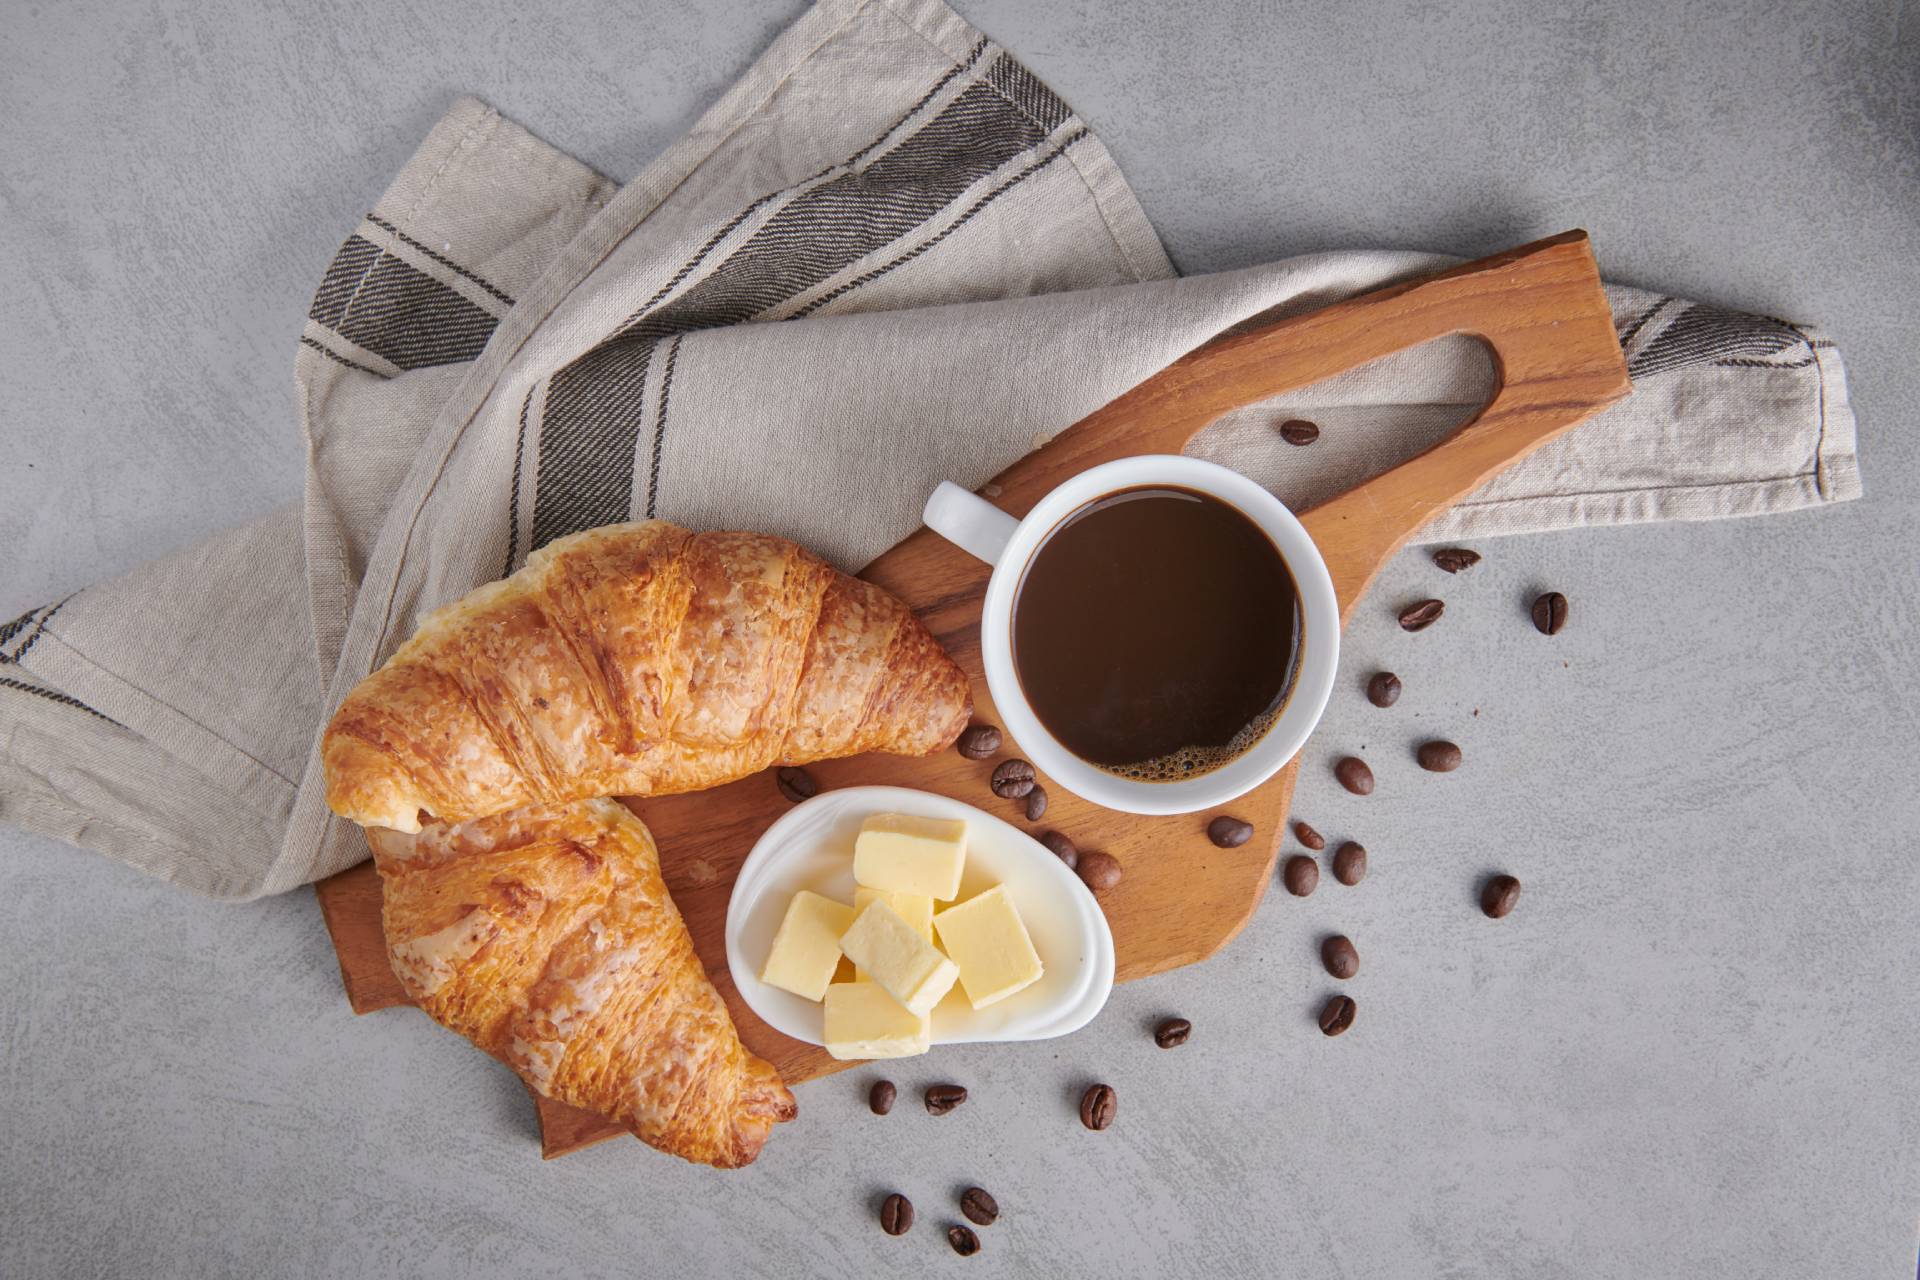 r15-delicious-breakfast-with-fresh-croissants-coffee-served-with-butter.jpg